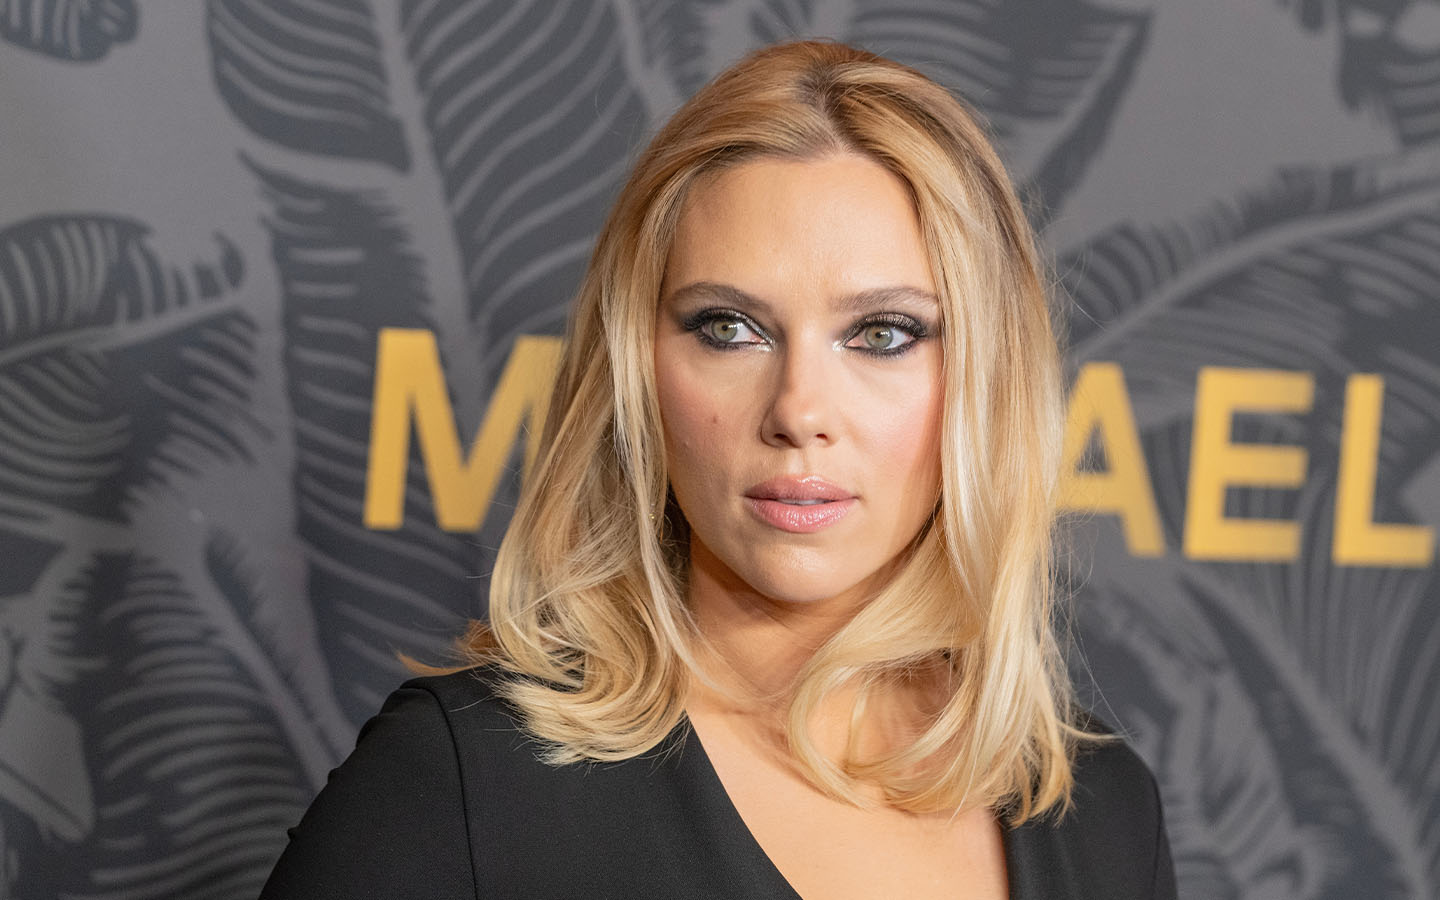 Scarlett Johansson calls for legal protections after ChatGPT allegedly copied her voice 